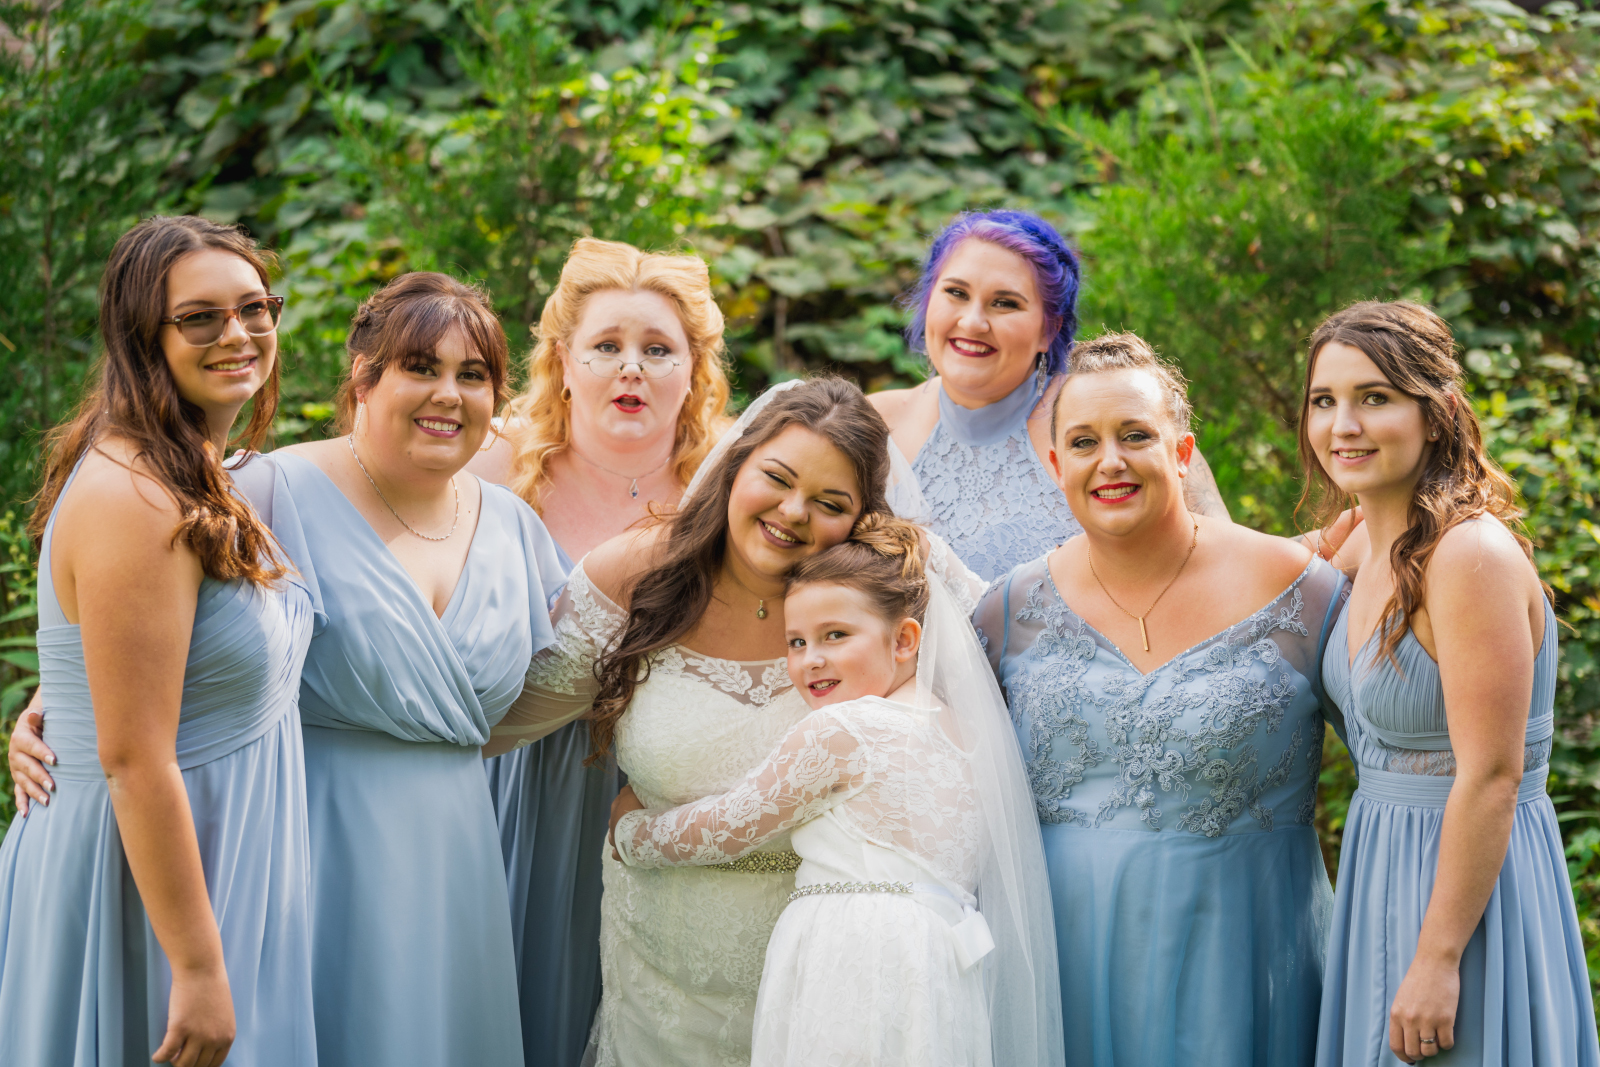 Bride with bridesmaids and flower girl, bridal party portrait, cute, hug, green, trees, nature, outdoor September wedding ceremony at Westfall Event Center